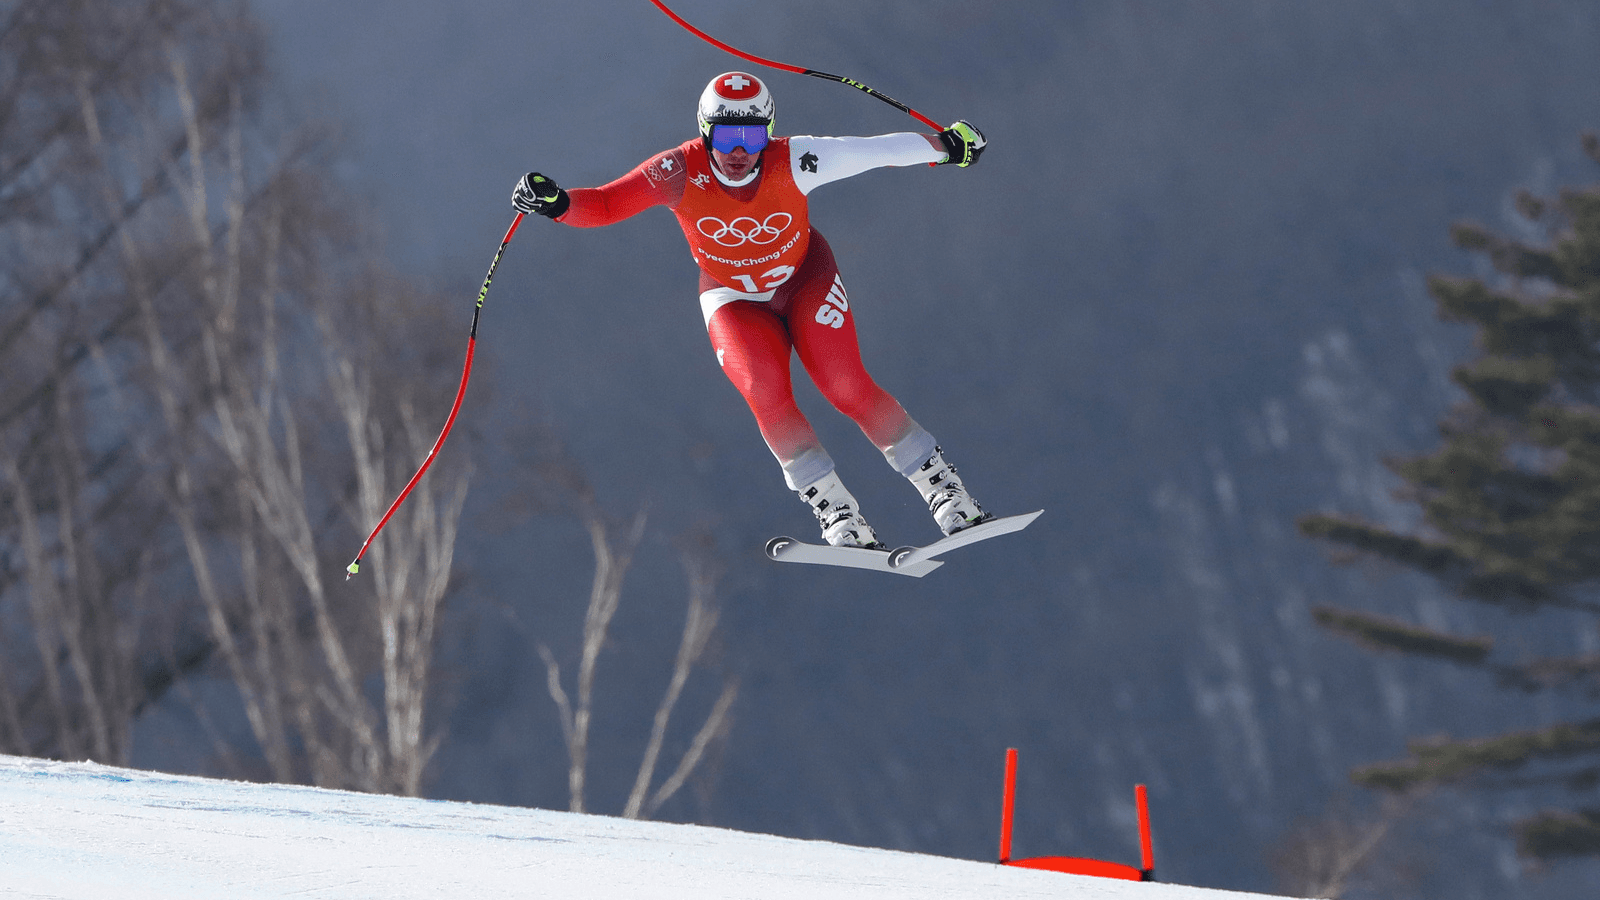 Beat Feuz of Switzerland takes a jump during the second training run for the men's downhill of the Pyeongchang 2018 Winter Olympic Games at the Jeongseon Alpine Centre in Pyeongchang, South Korea, Feb. 9, 2018.  